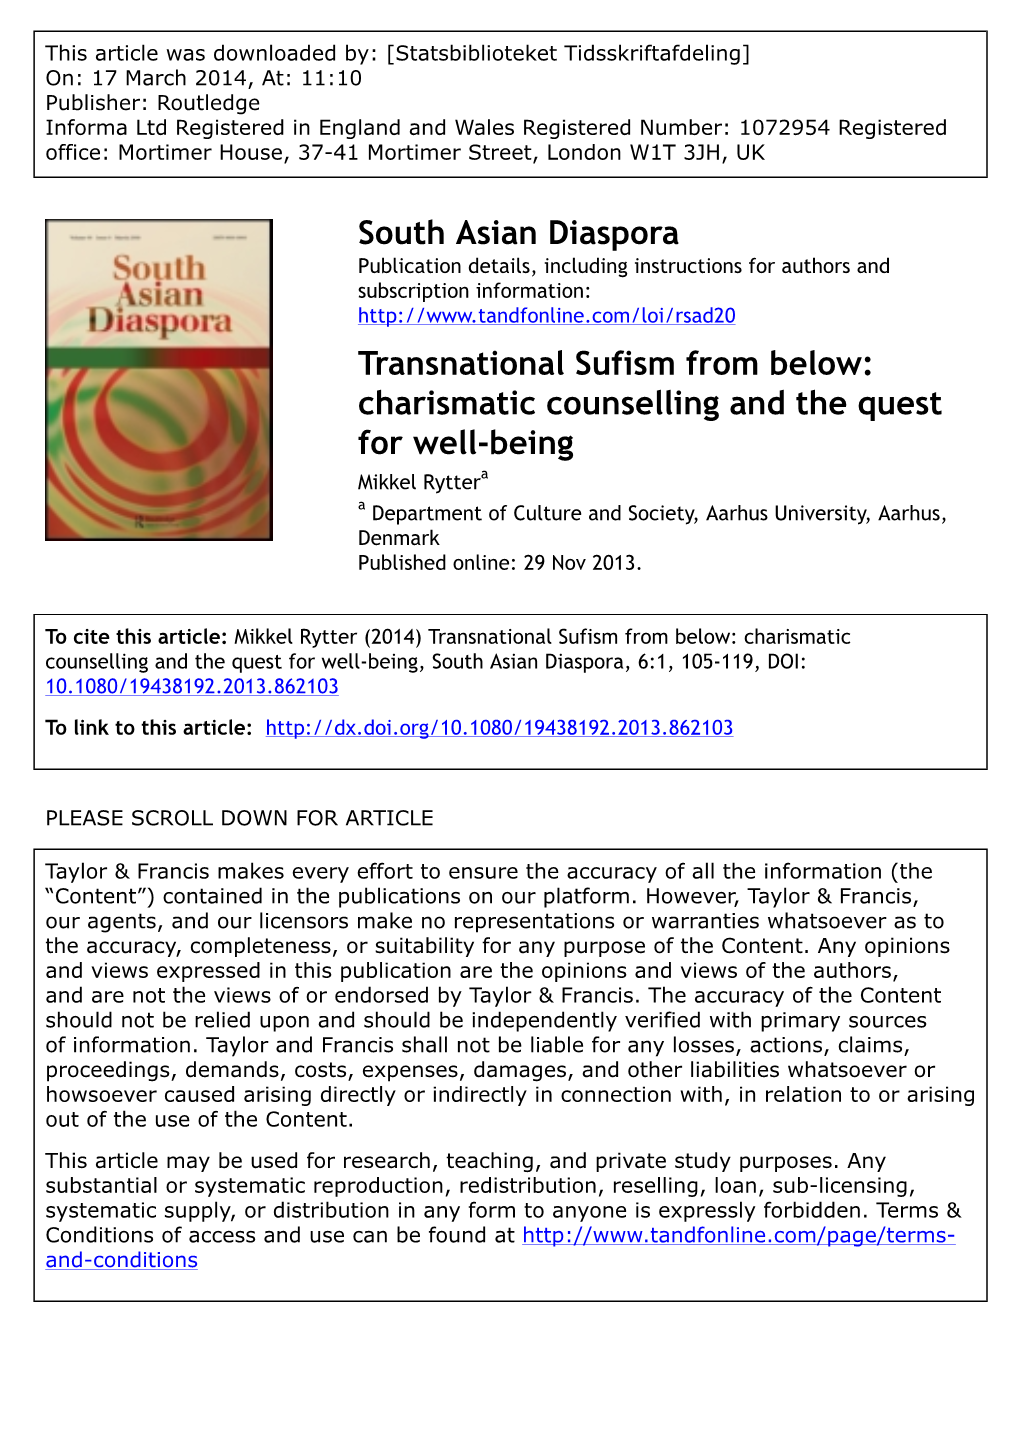 Transnational Sufism from Below: Charismatic Counselling and The